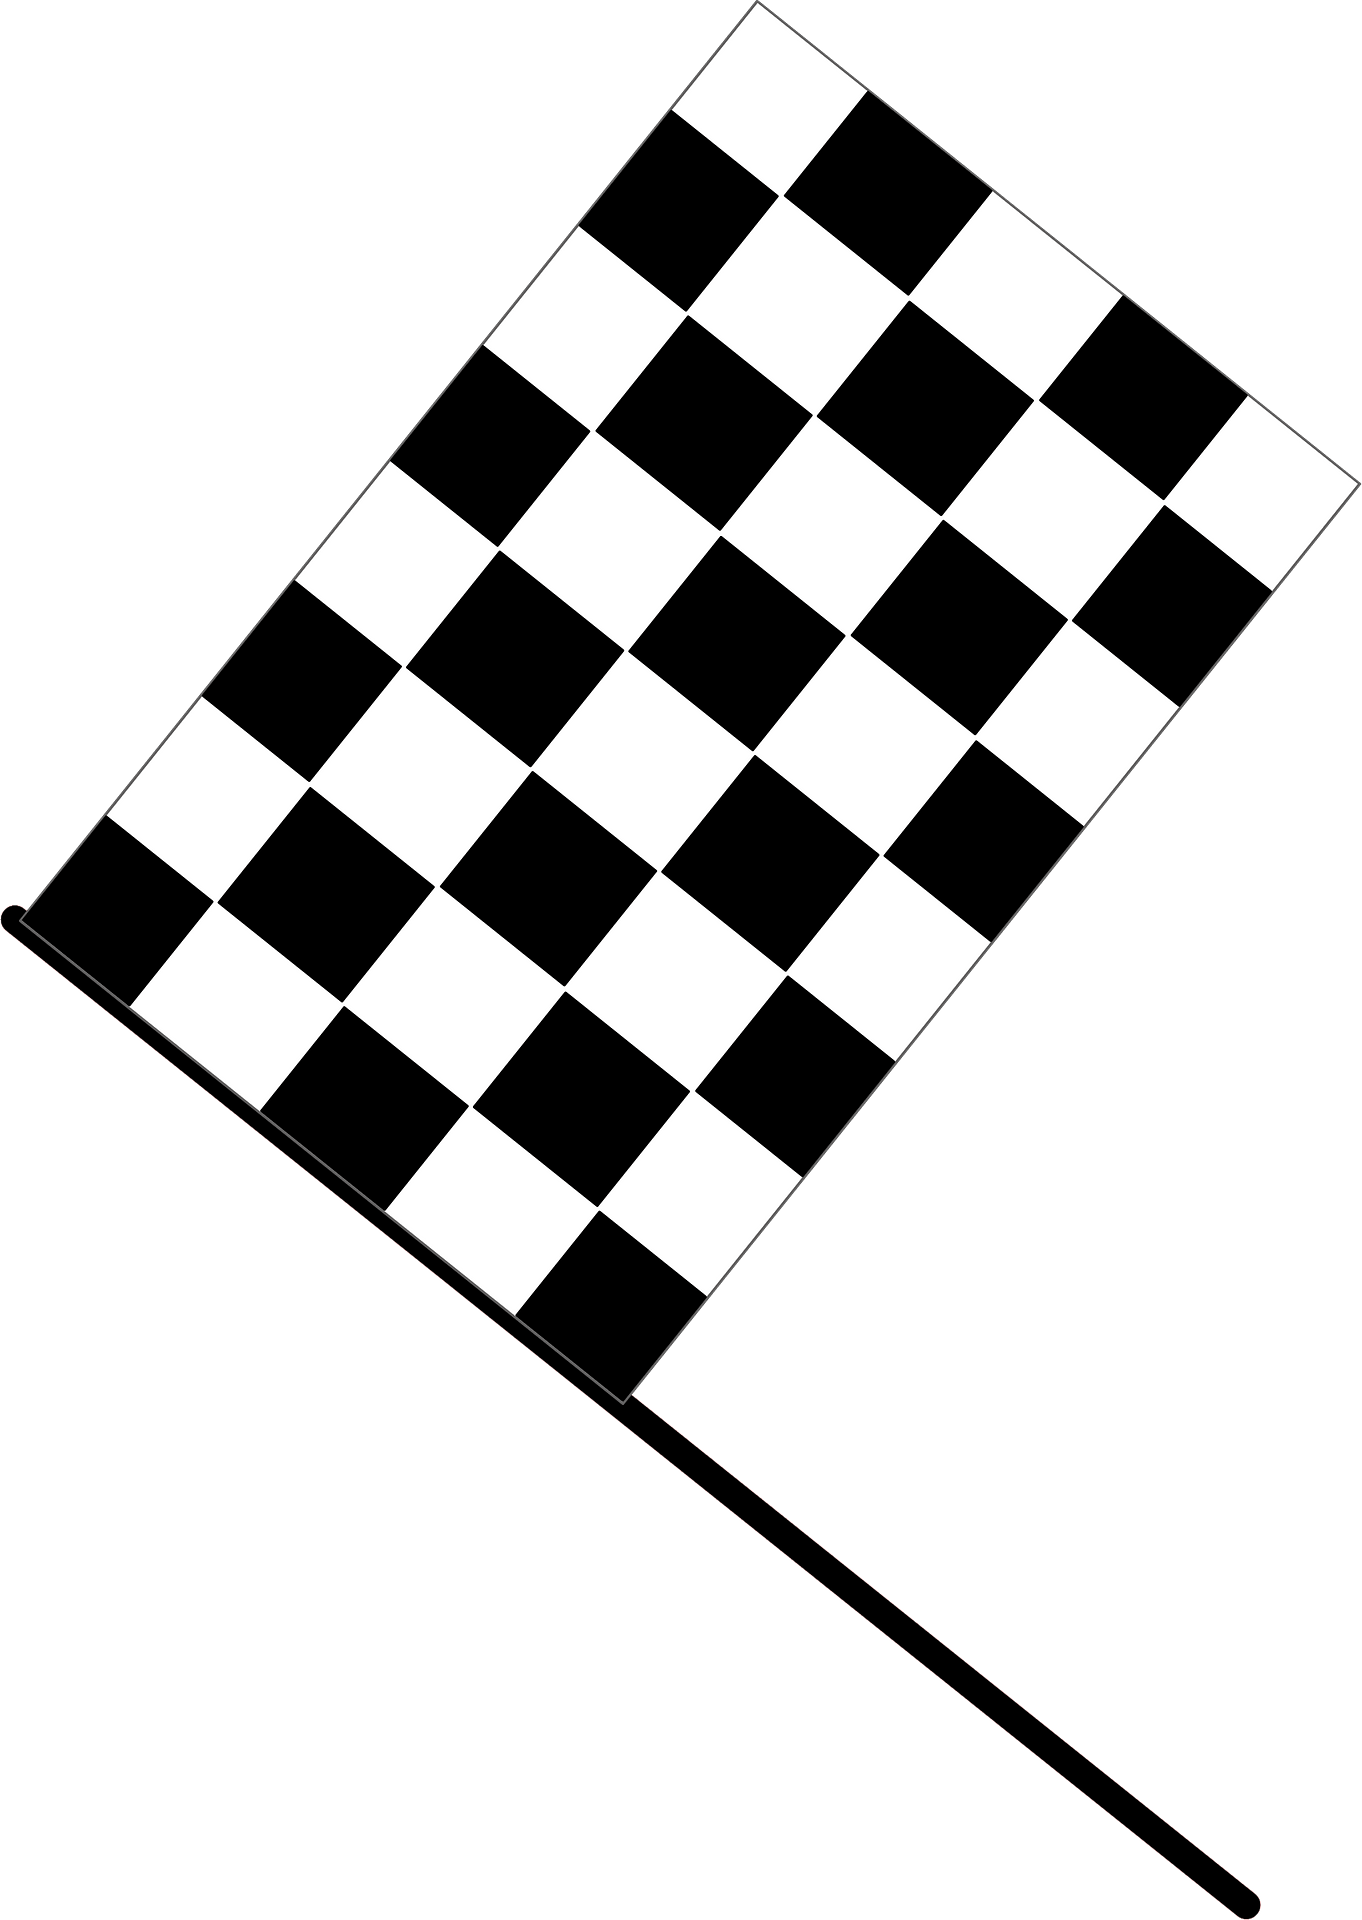 Checkered Background Vector Seamless Pattern. Clip Art Royalty - Clip ...